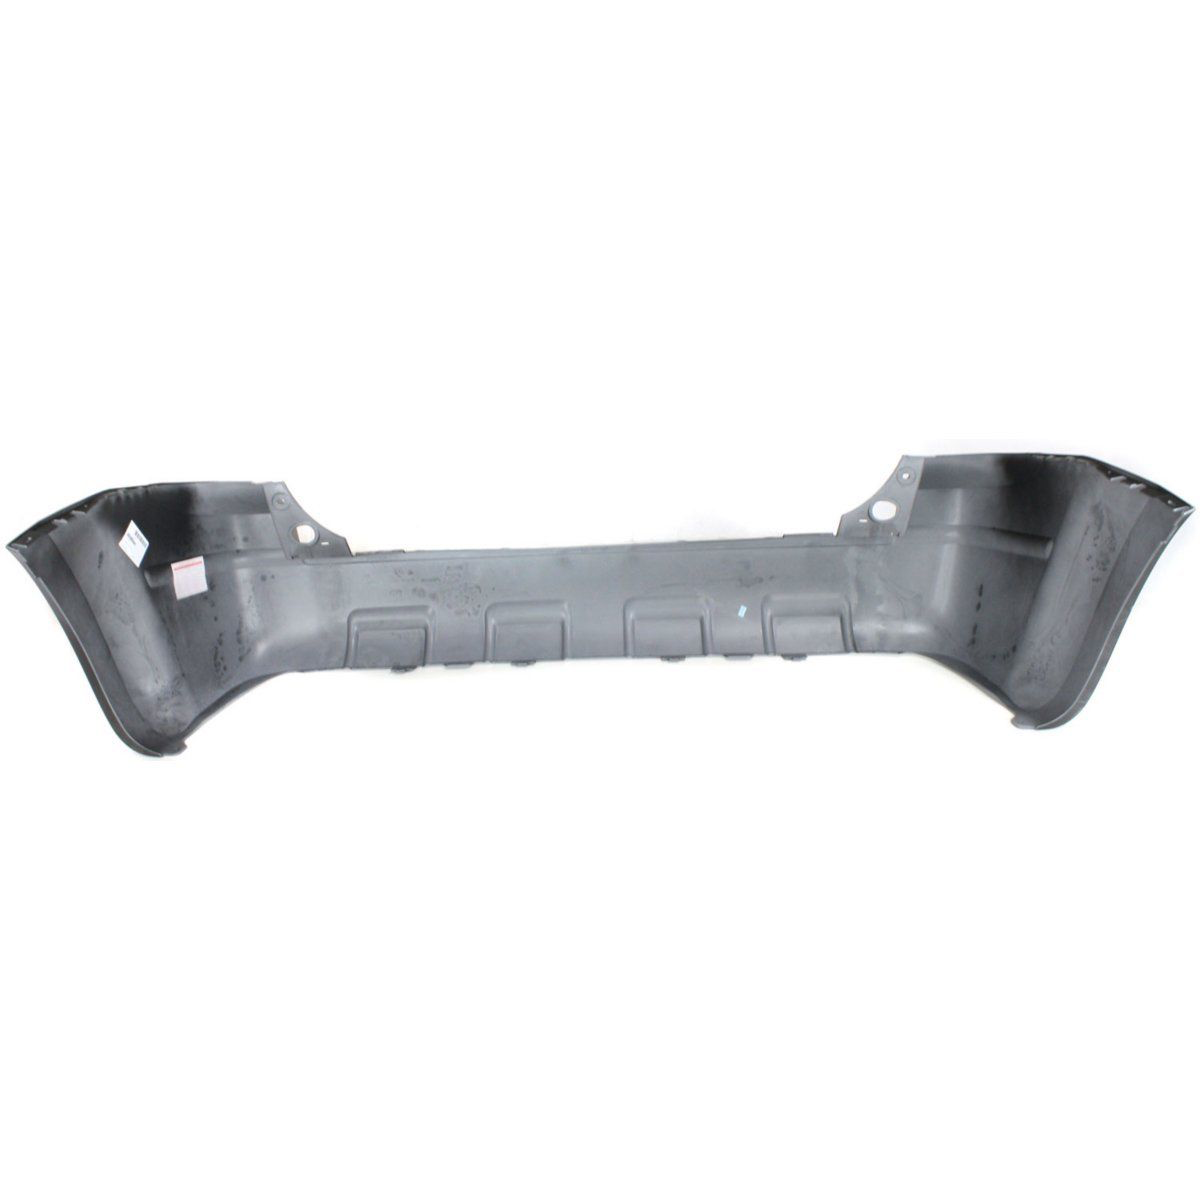 2008-2012 FORD ESCAPE Rear Bumper Cover w/o Rear Object Sensor  w/o Towing Pkg Painted to Match